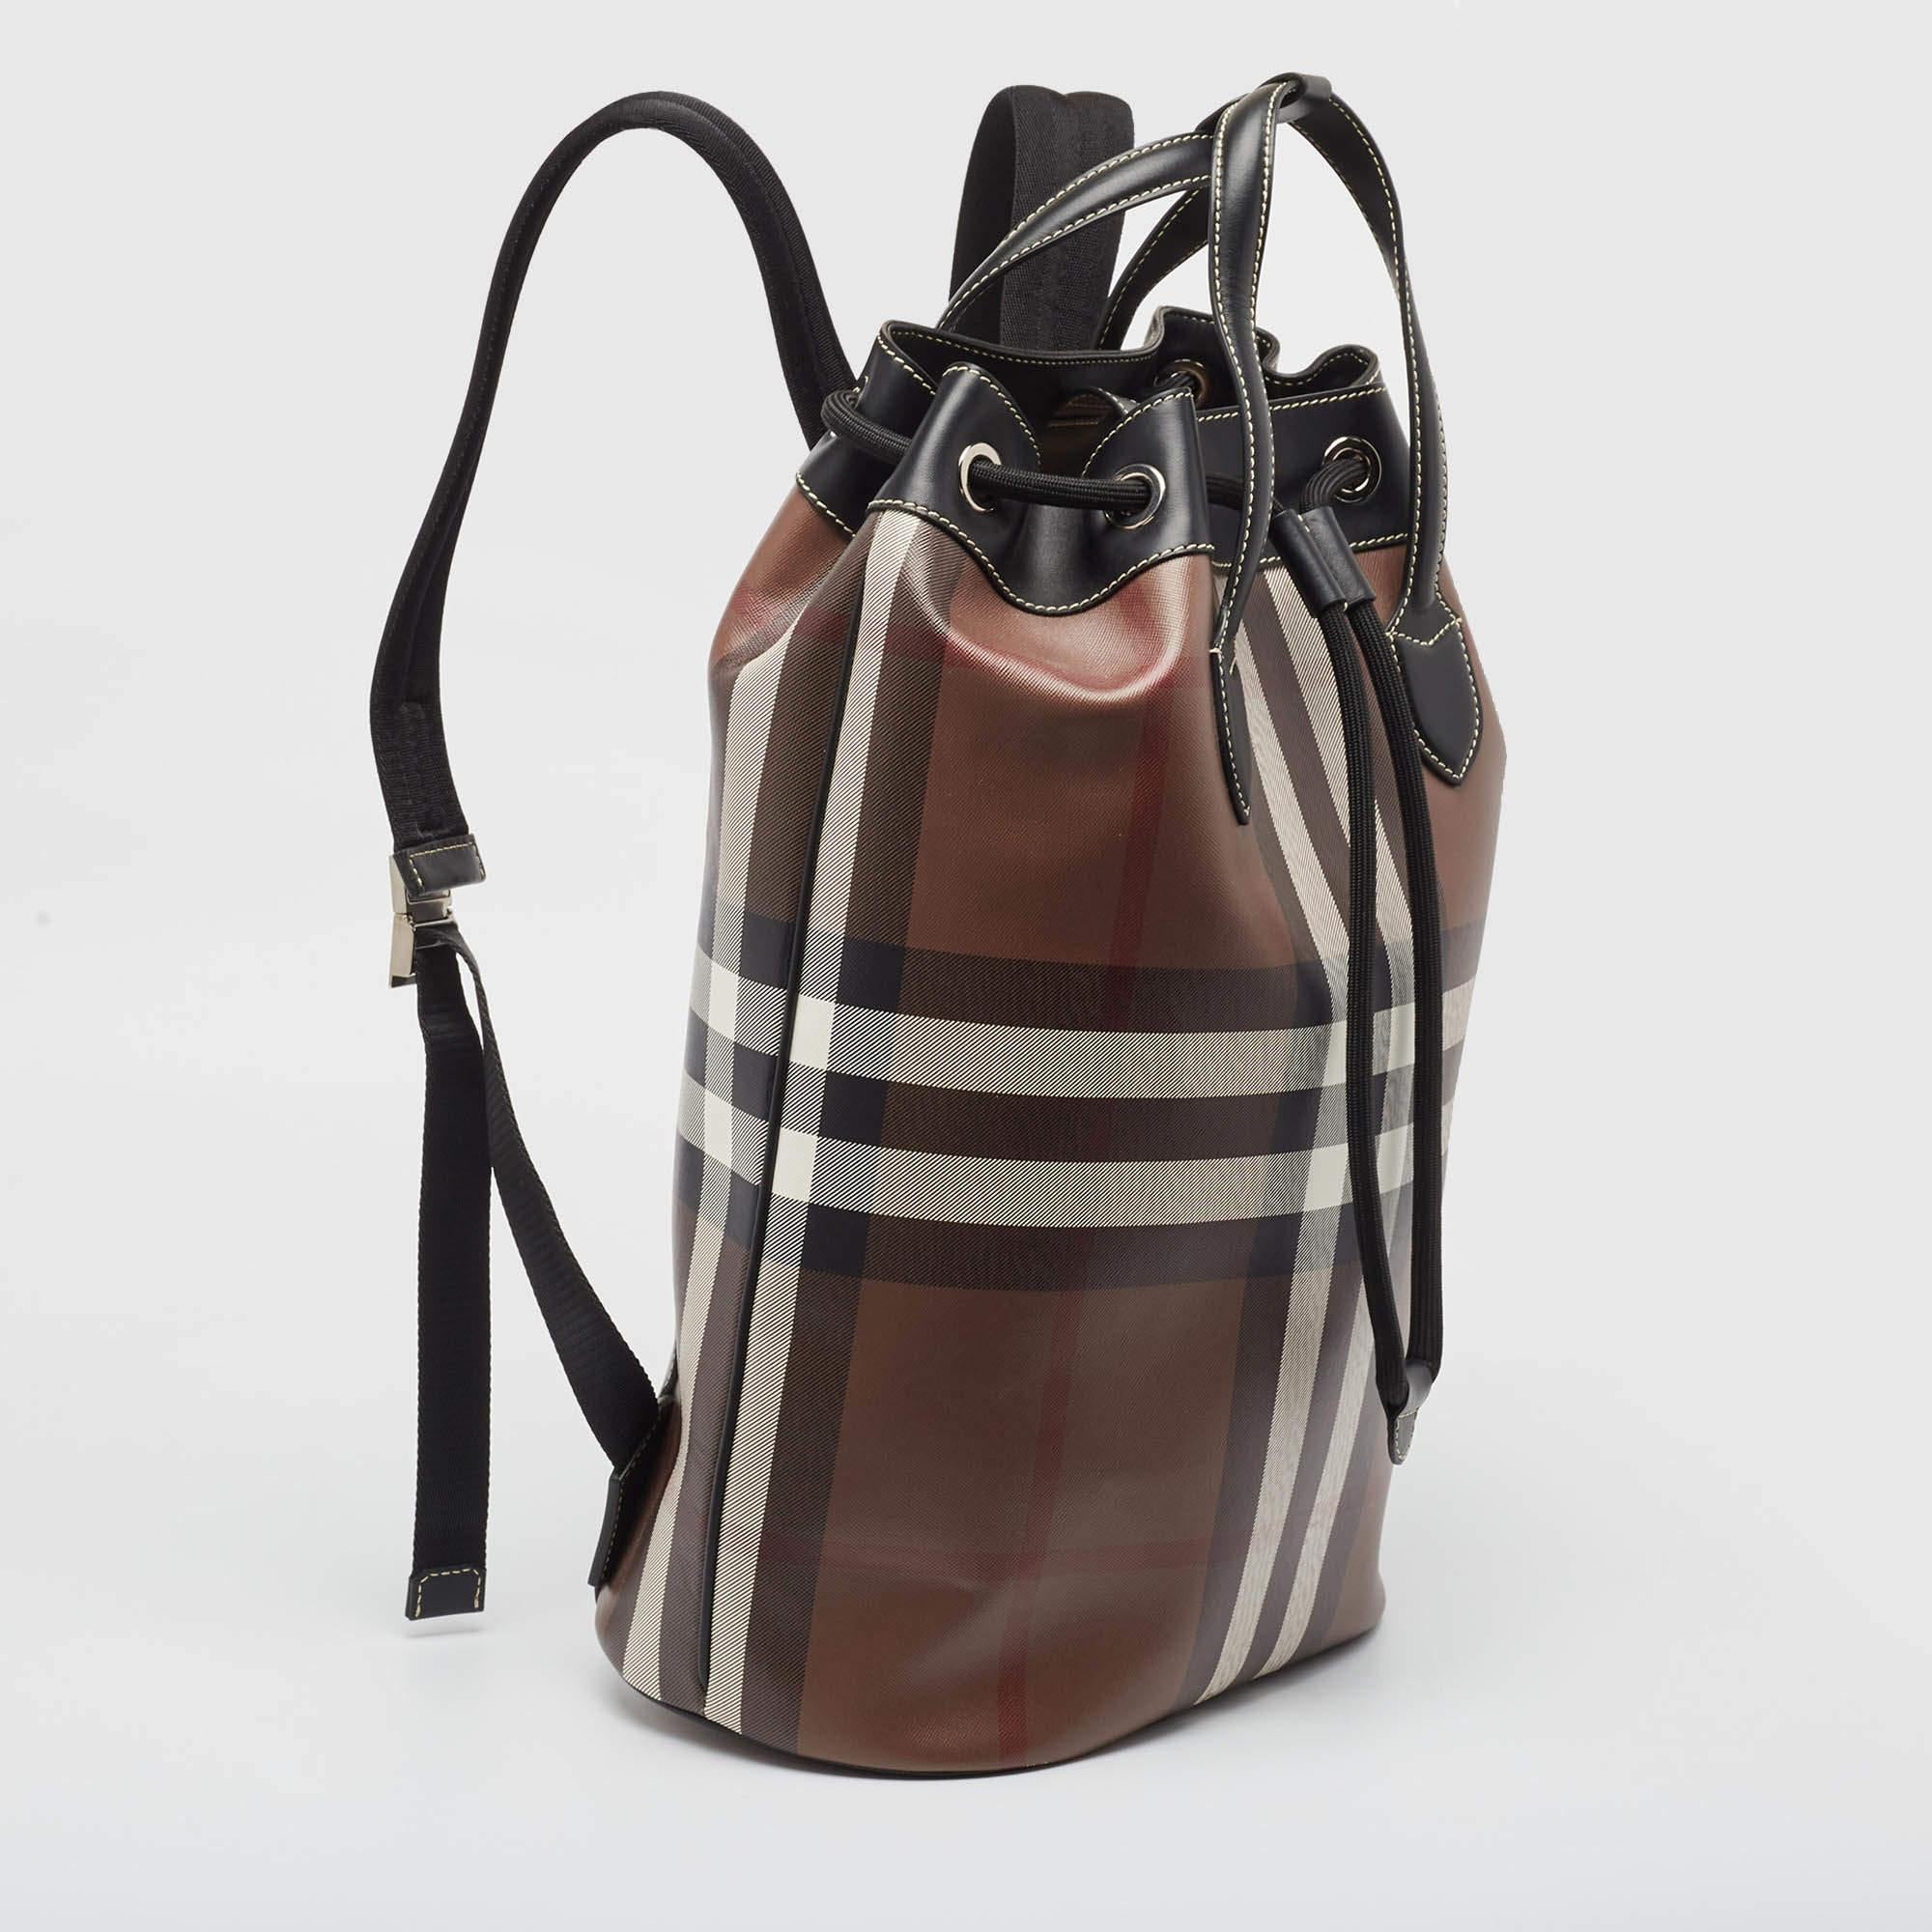 Burberry Dark Birch Brown Check Coated Canvas and Leather Drawcord Backpack Herren im Angebot